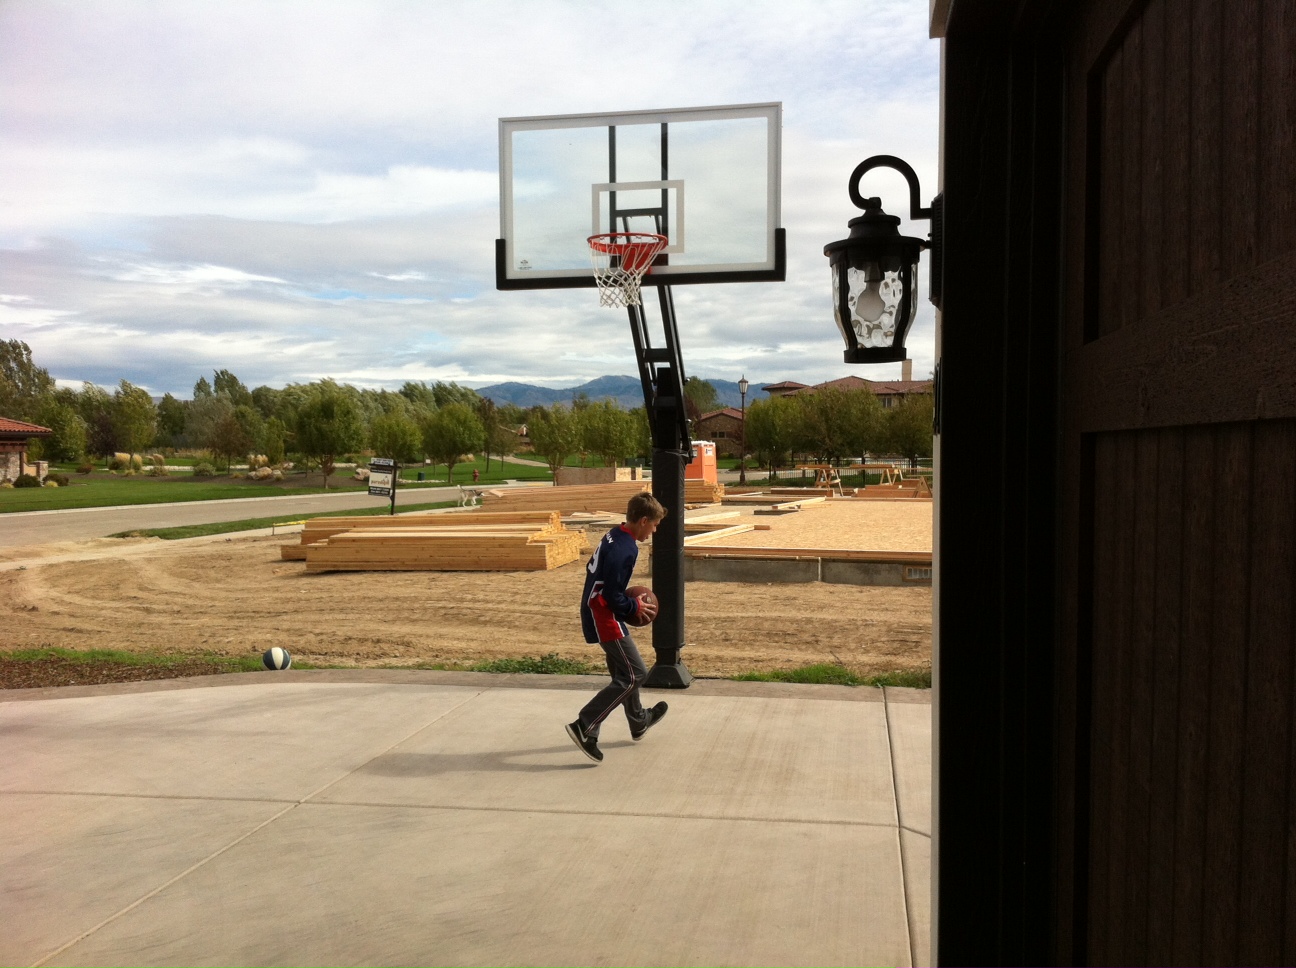 Practice makes perfect for the youngster that plays on this Idaho installed Pro Dunk Platinum Basketball system. 